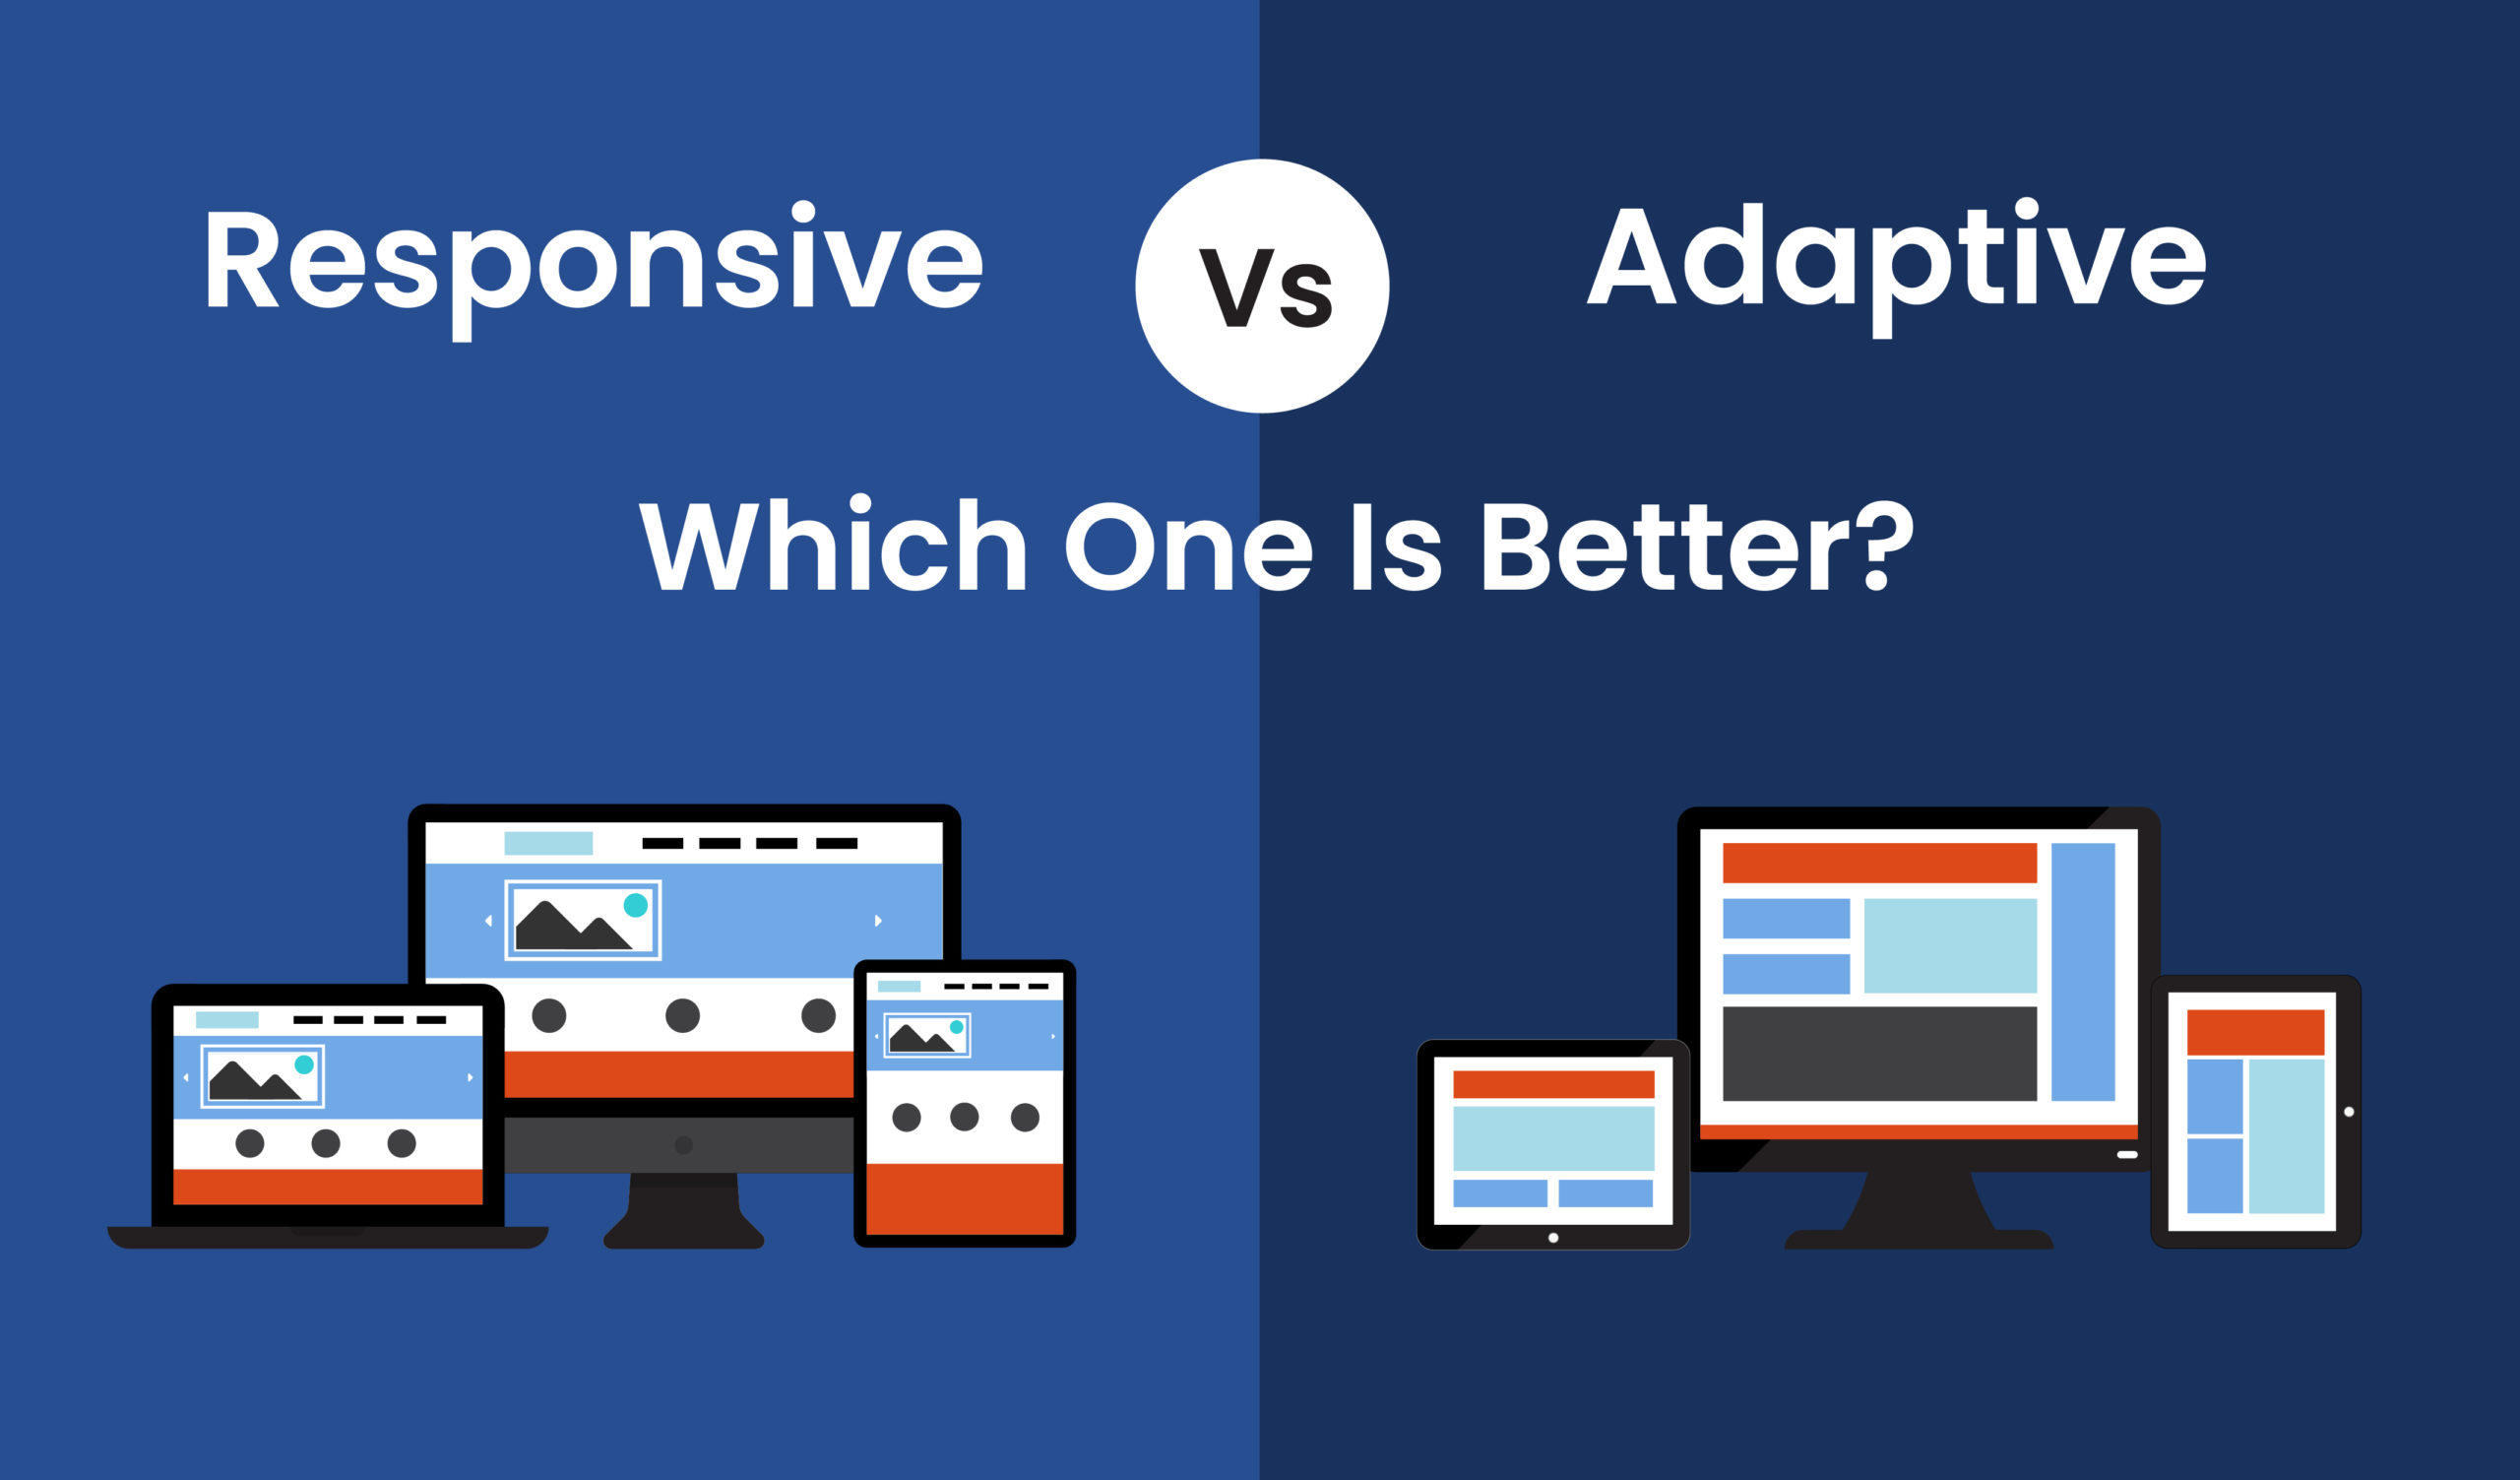 Responsive Web Design Vs Adaptive Web Design: which one is better?